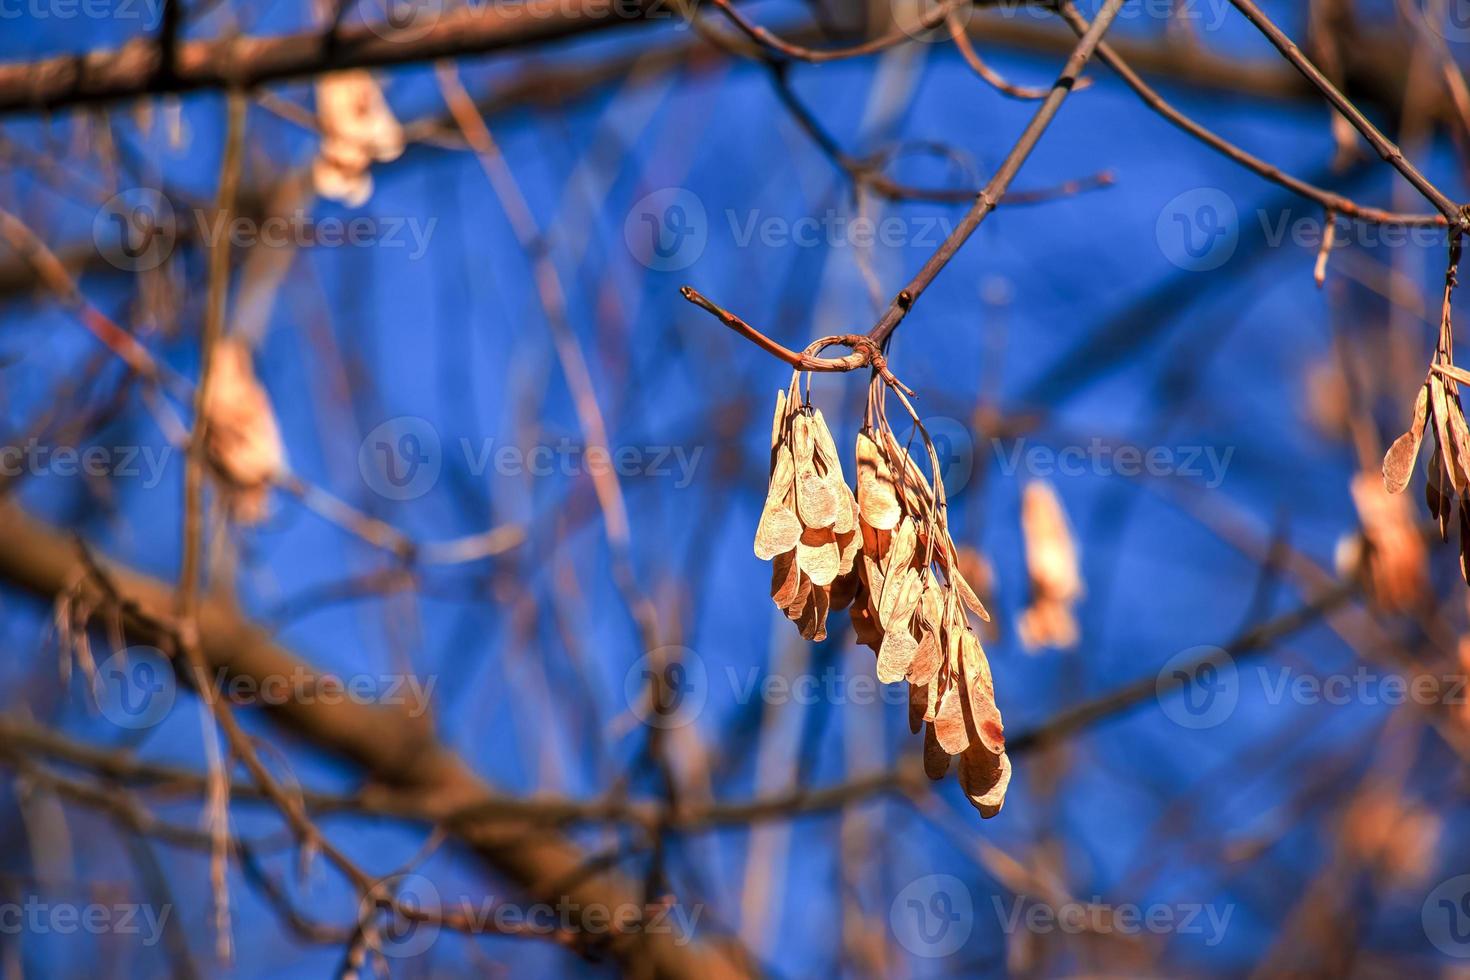 Amur maple branches with dry seeds and buds against blue sky - Latin name - Acer tataricum subsp. Ginnala photo